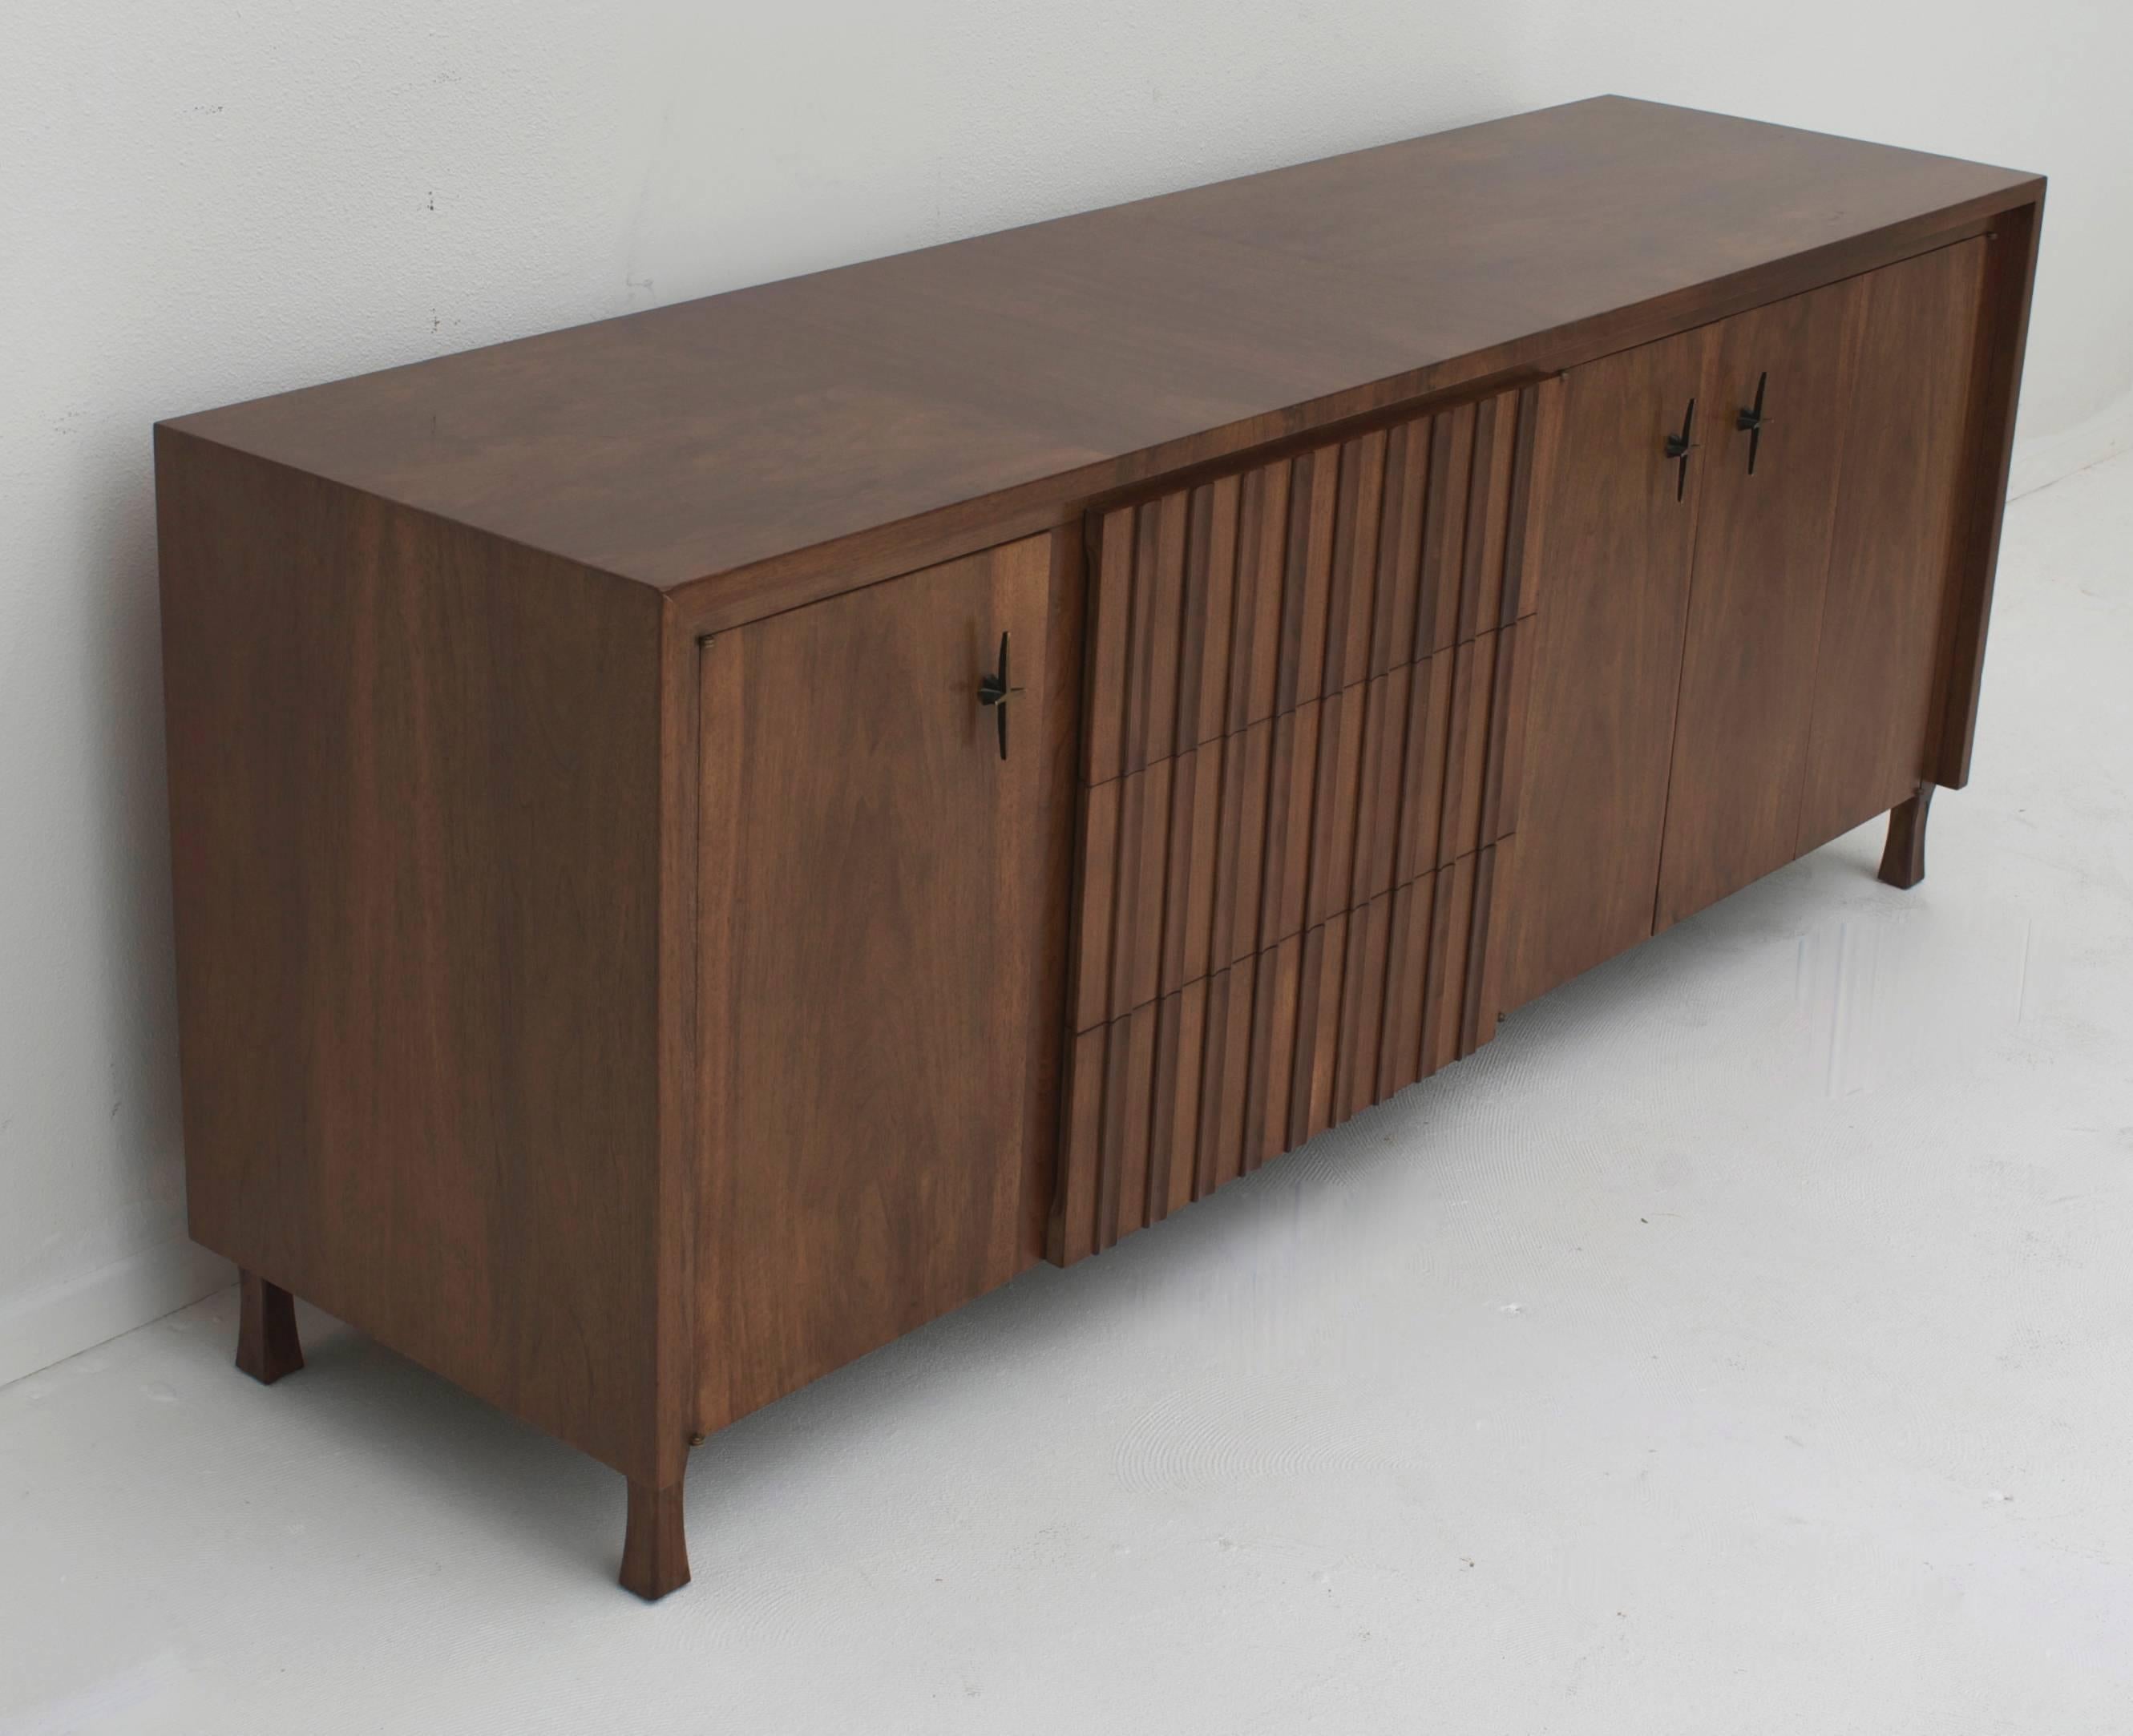 A solid walnut credenza which has been restored to its original luster. It retains its original hardware.
The cabinet has a fixed door and a set of accordion doors on the right side which open to reveal a shelf. The middle has three fluted front